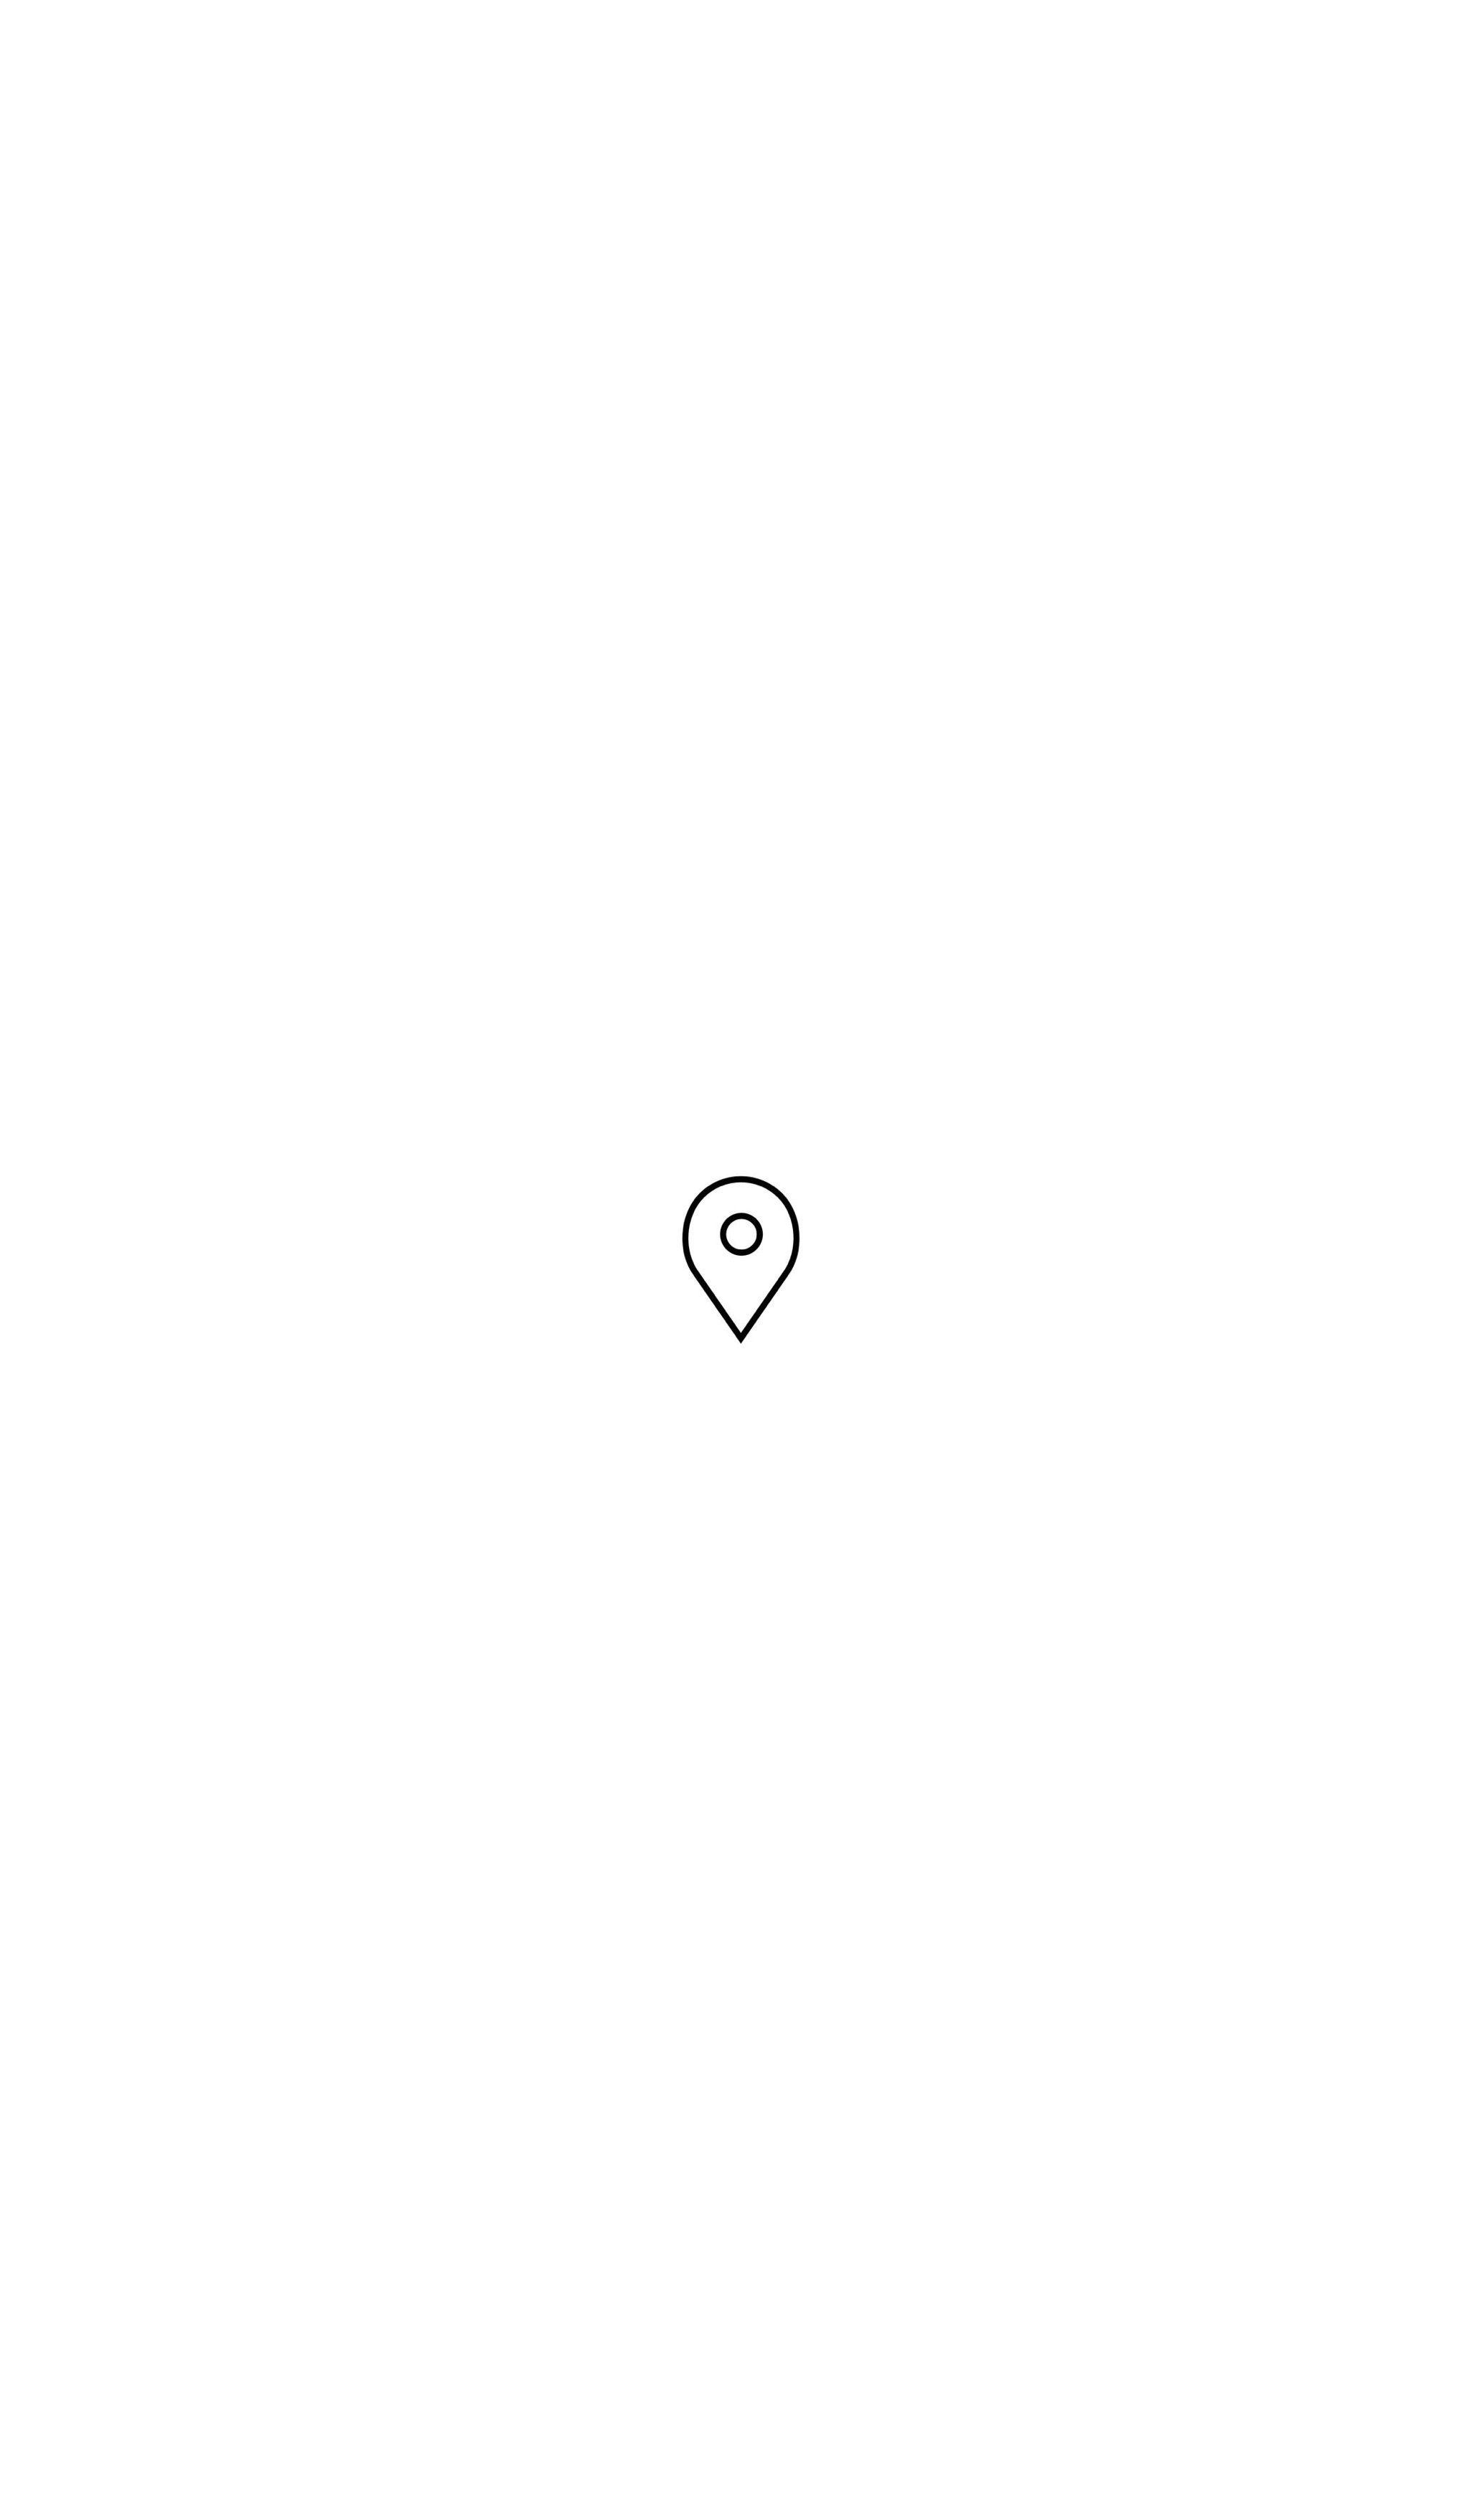 Location. Instagram highlight icons, Instagram icons